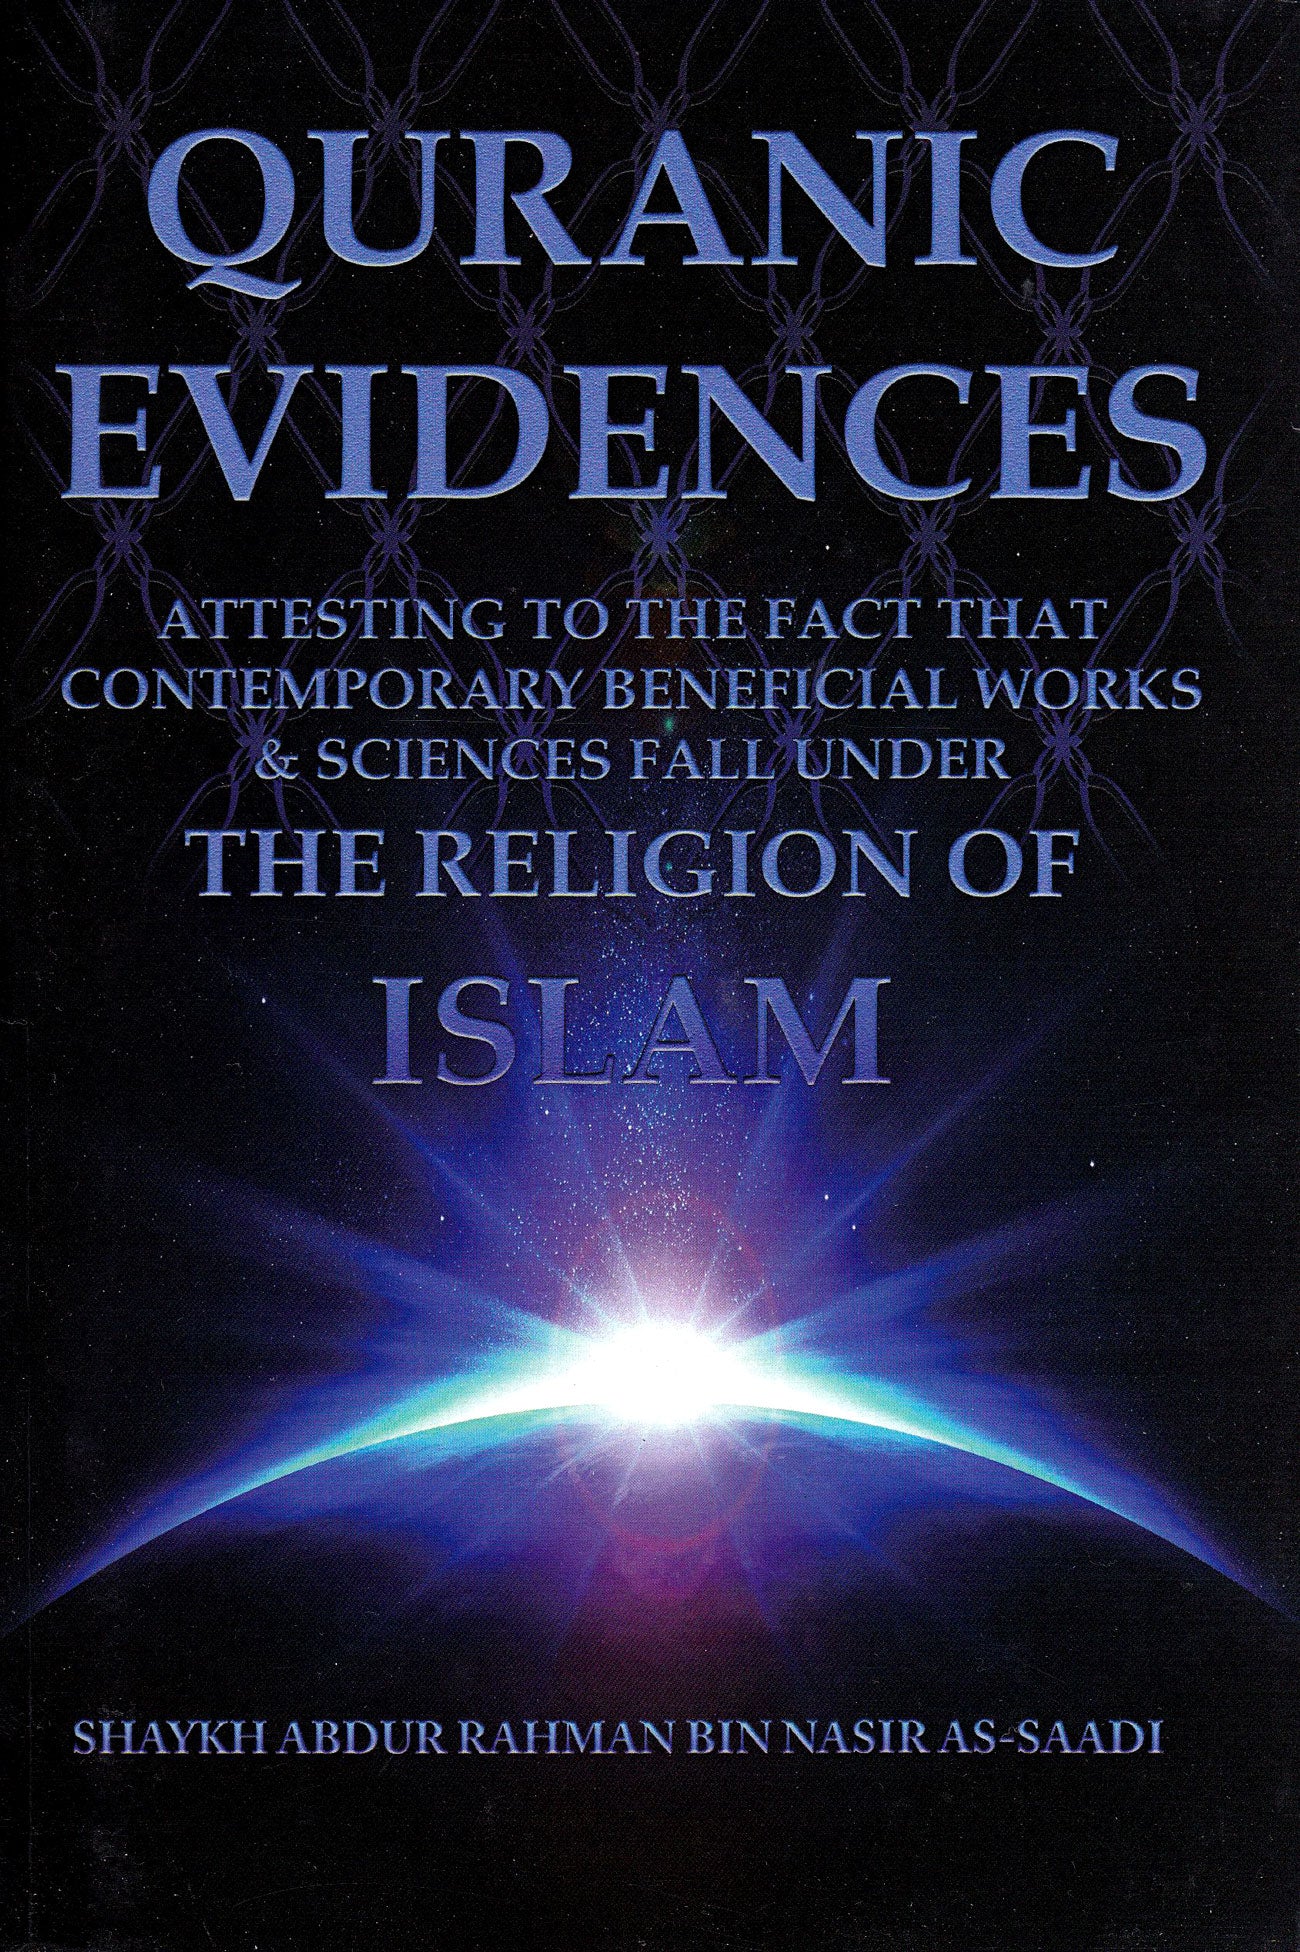 Quranic Evidences Attesting to the Fact That Contemporary Beneficial Works & Sciences Fall Under The Religion of Islam